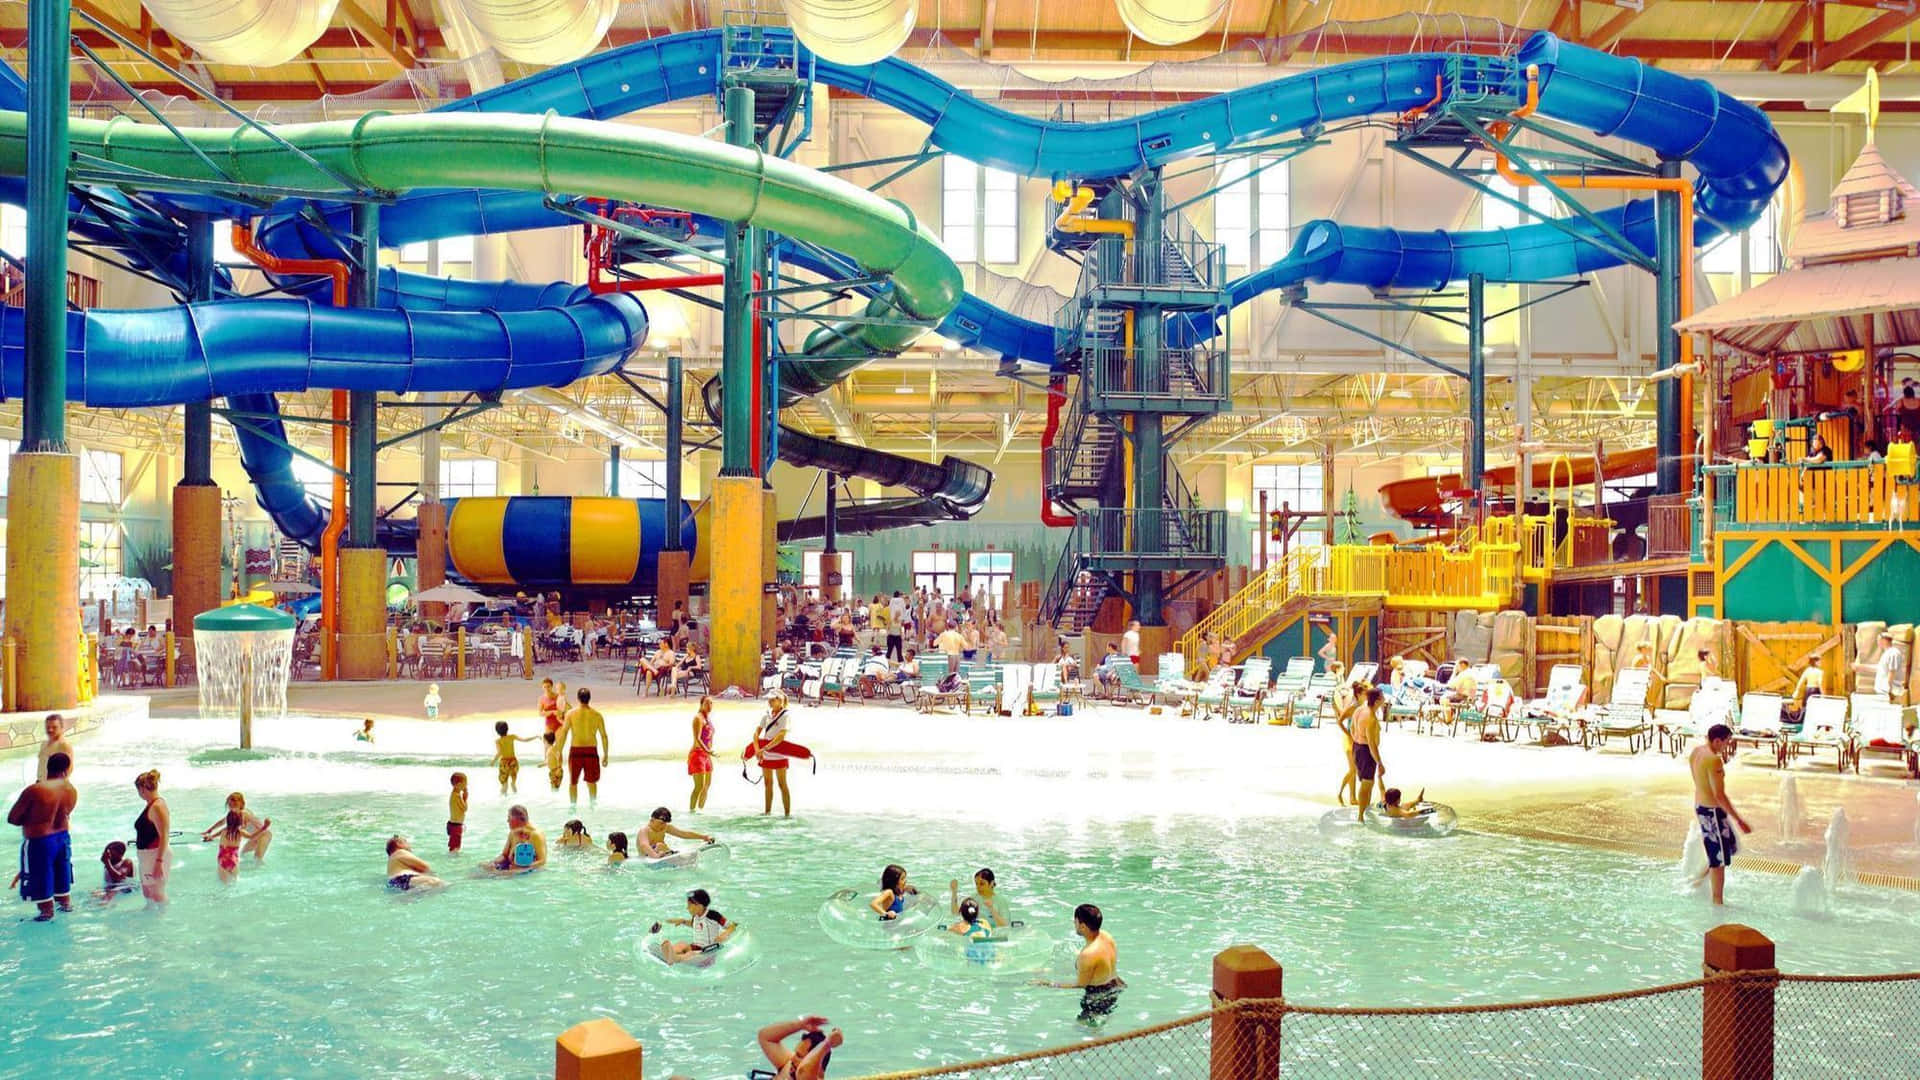 A Large Indoor Water Park With Many People Playing